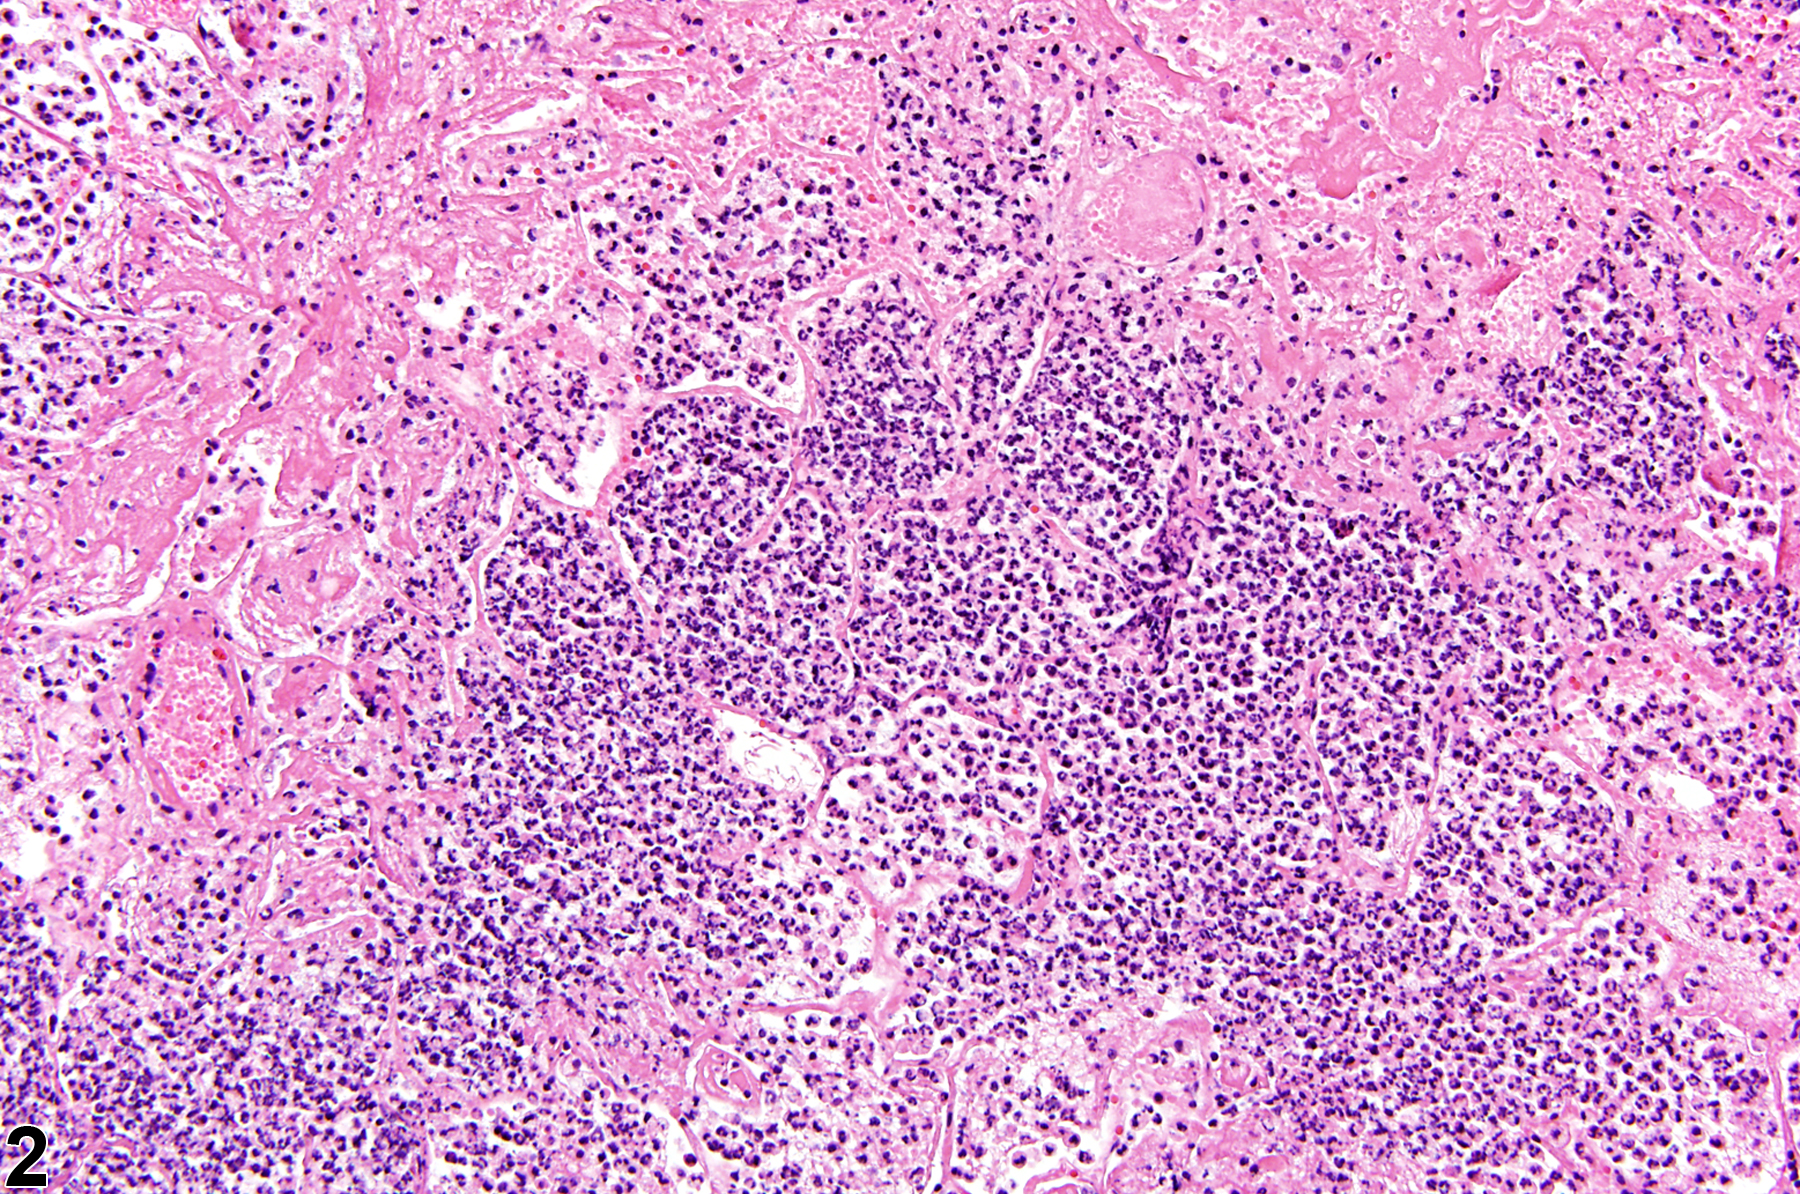 Image of epithelial necrosis in the lung from a male B6C3F1/N mouse in a subchronic study